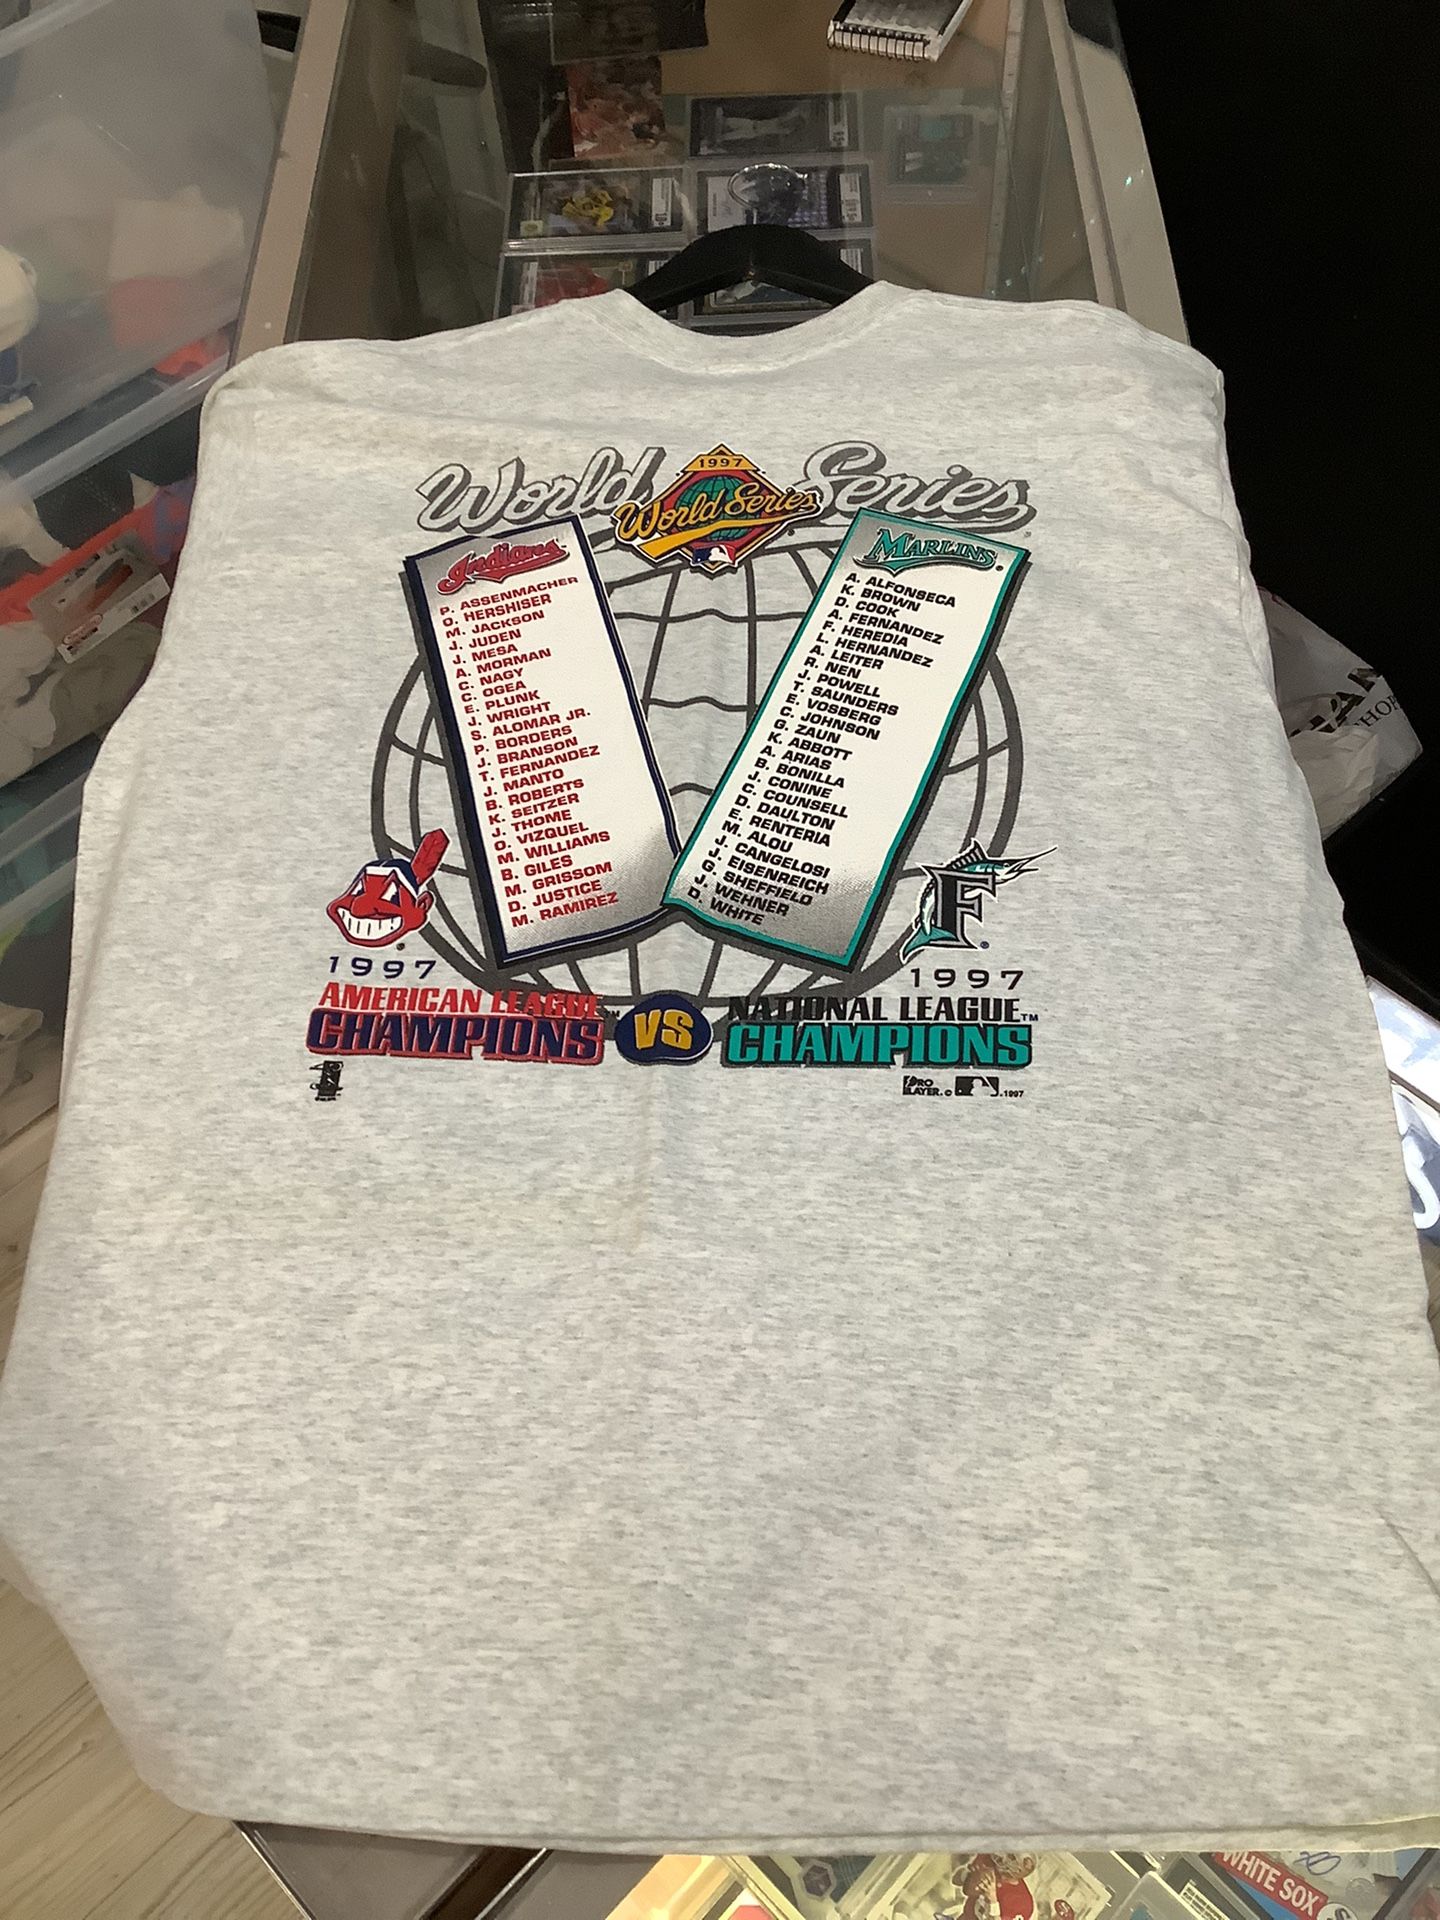 Florida Marlins 1997 World Series Championship T-Shirt for Sale in Miami,  FL - OfferUp